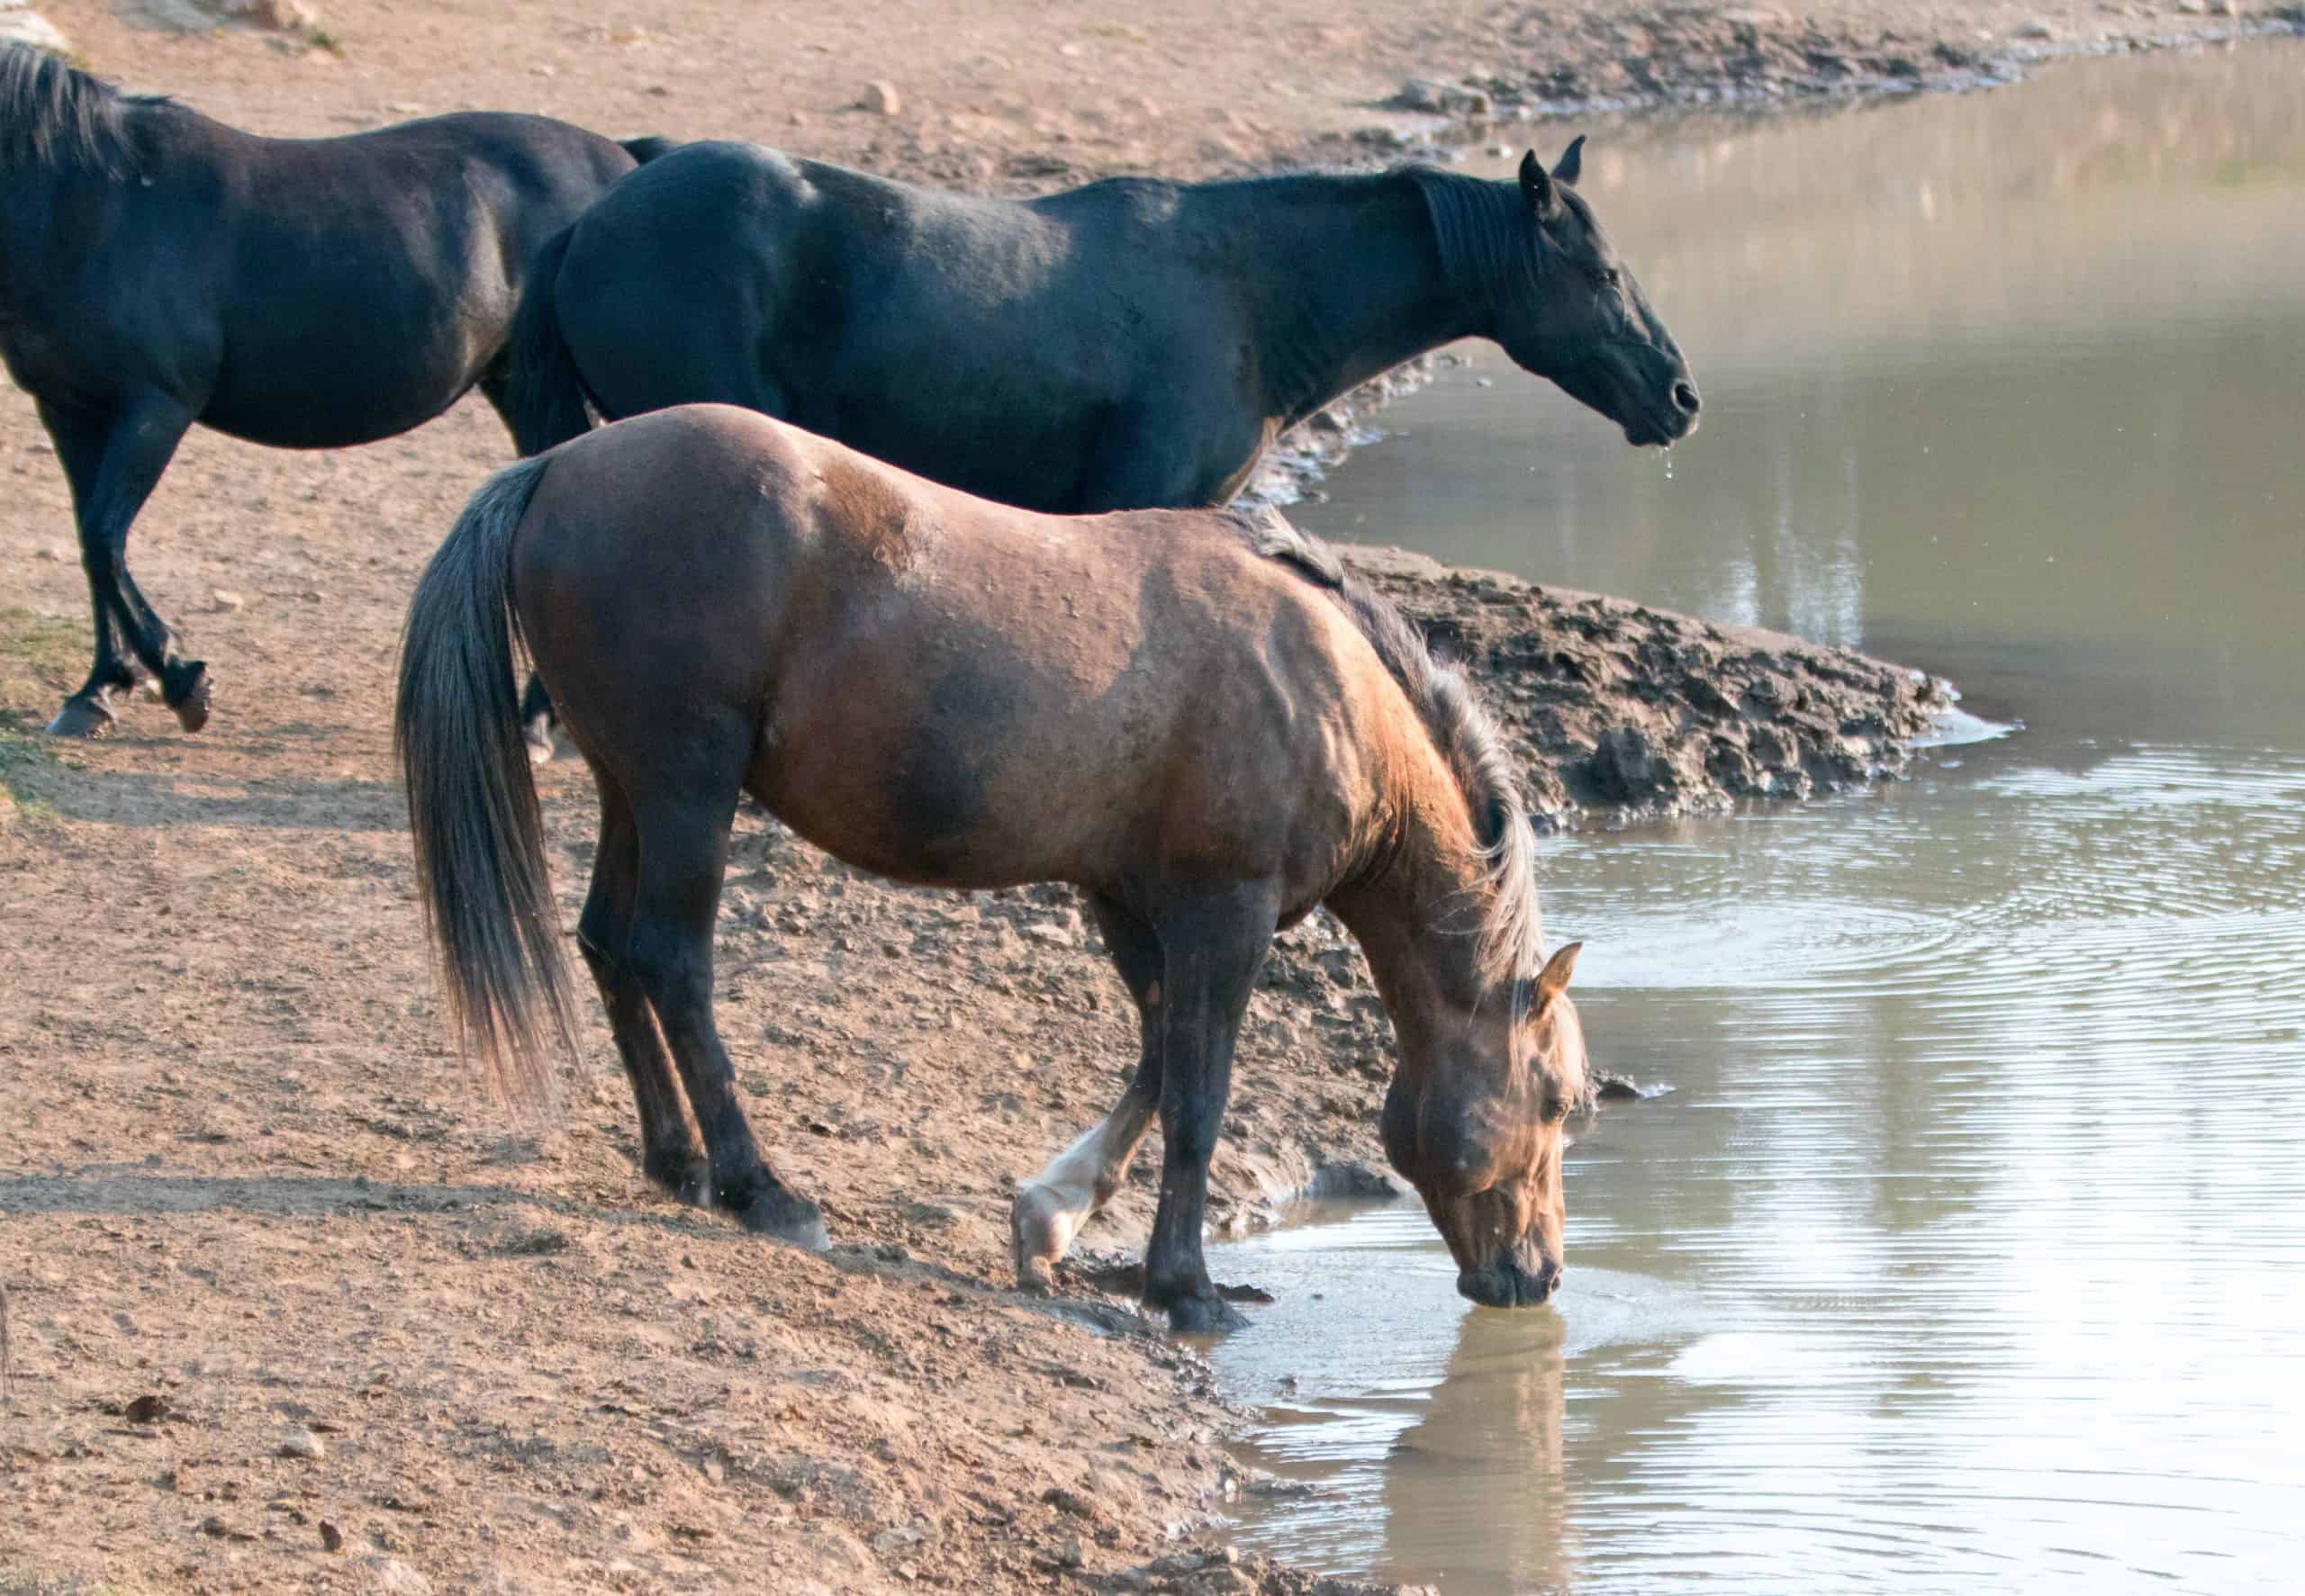 Sooty Palomino stallion drinking water at waterhole with herd of wild horses at the waterhole in the Pryor Mountains Wild Horse Range in Montana United States